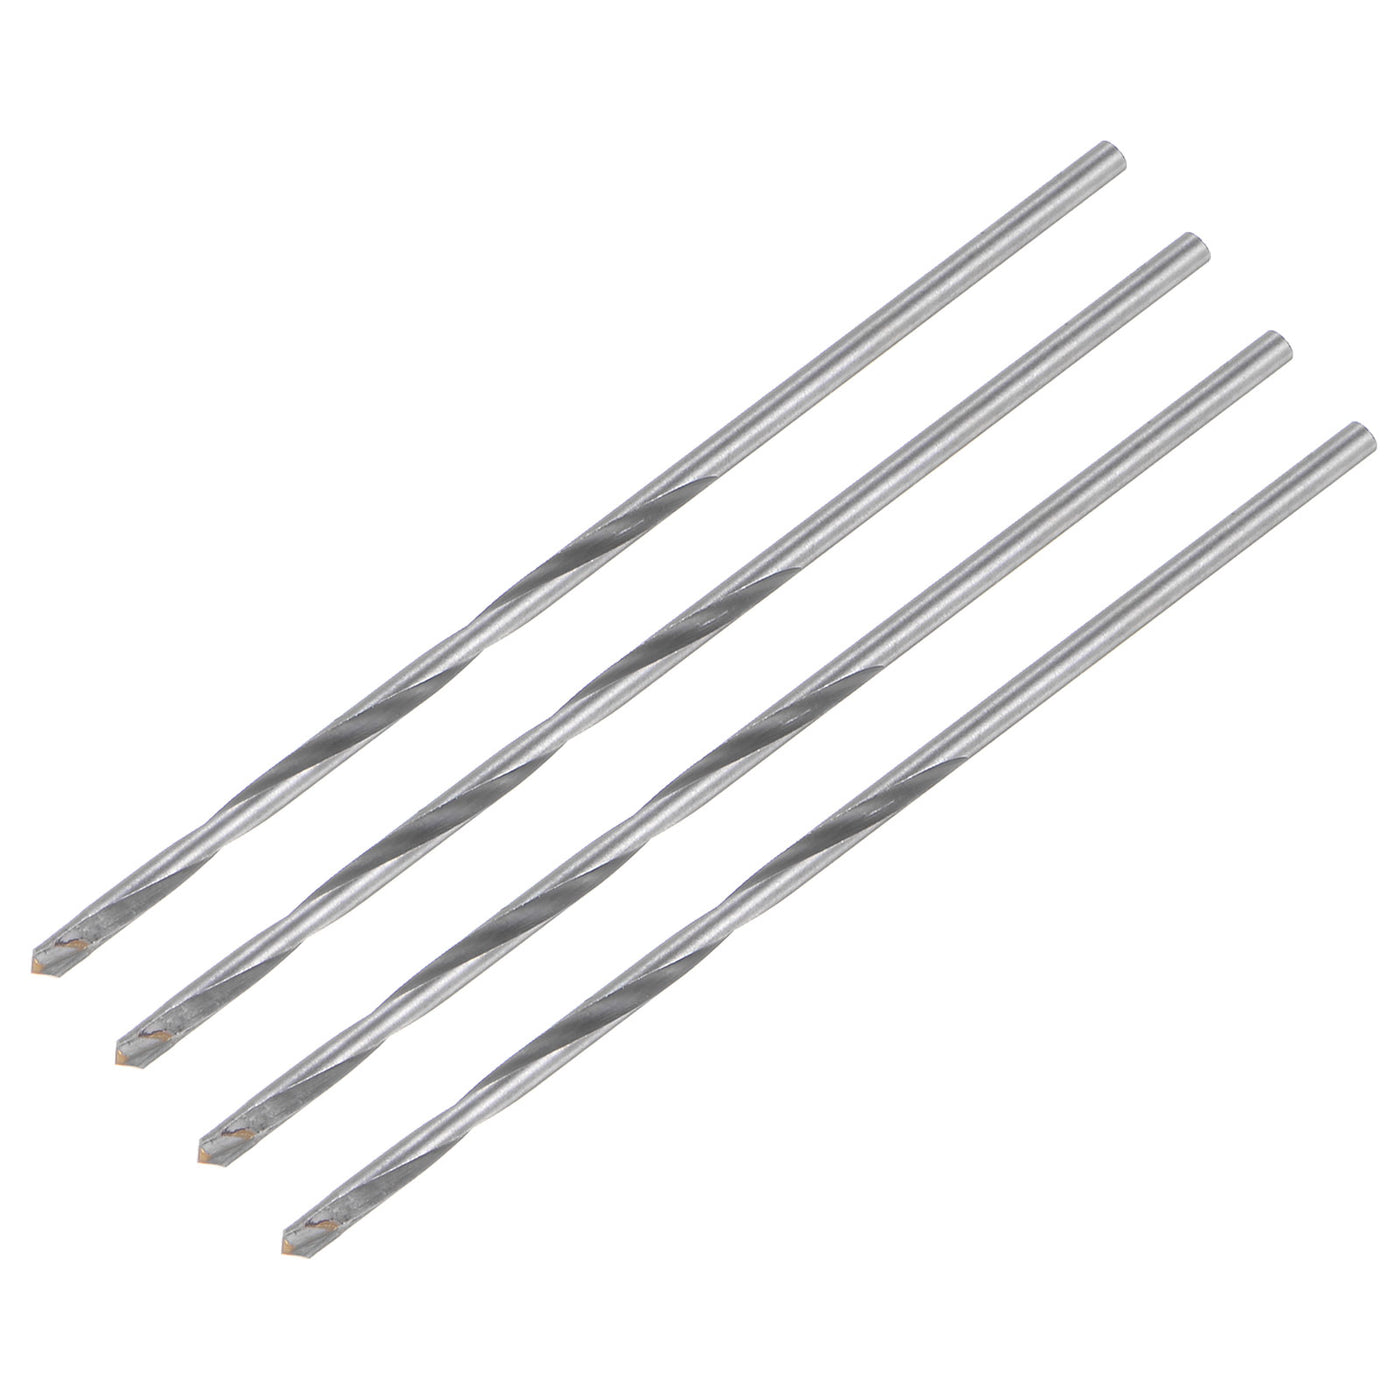 Uxcell Uxcell 7mm Cutting Dia Round Shank Cemented Carbide Twist Drill Bit, 130mm Length 4 Pcs